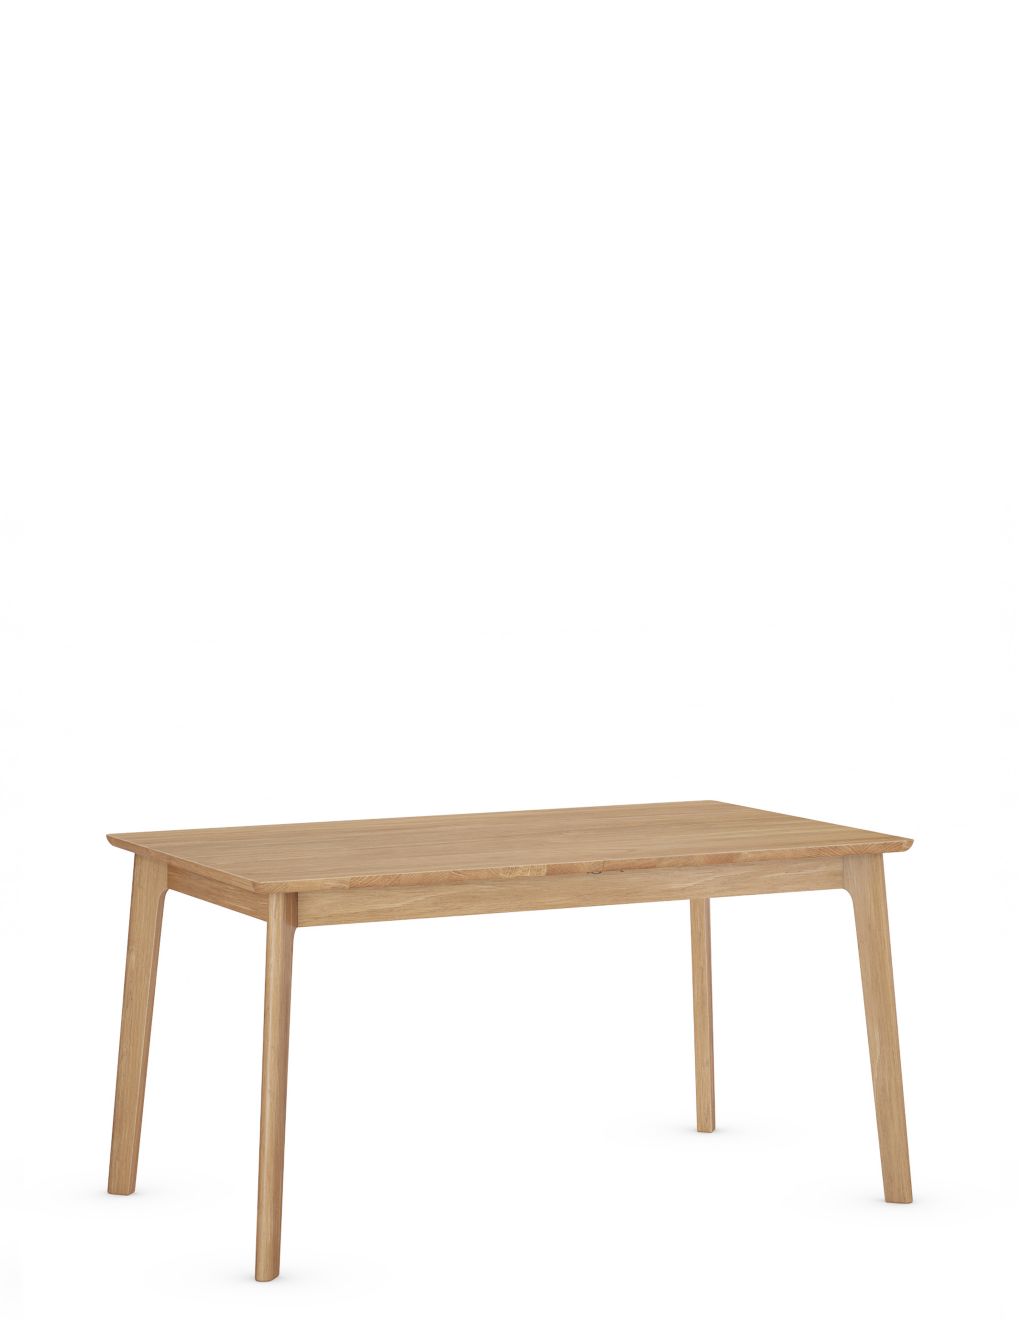 Nord 6-8 Seater Extending Dining Table image 3